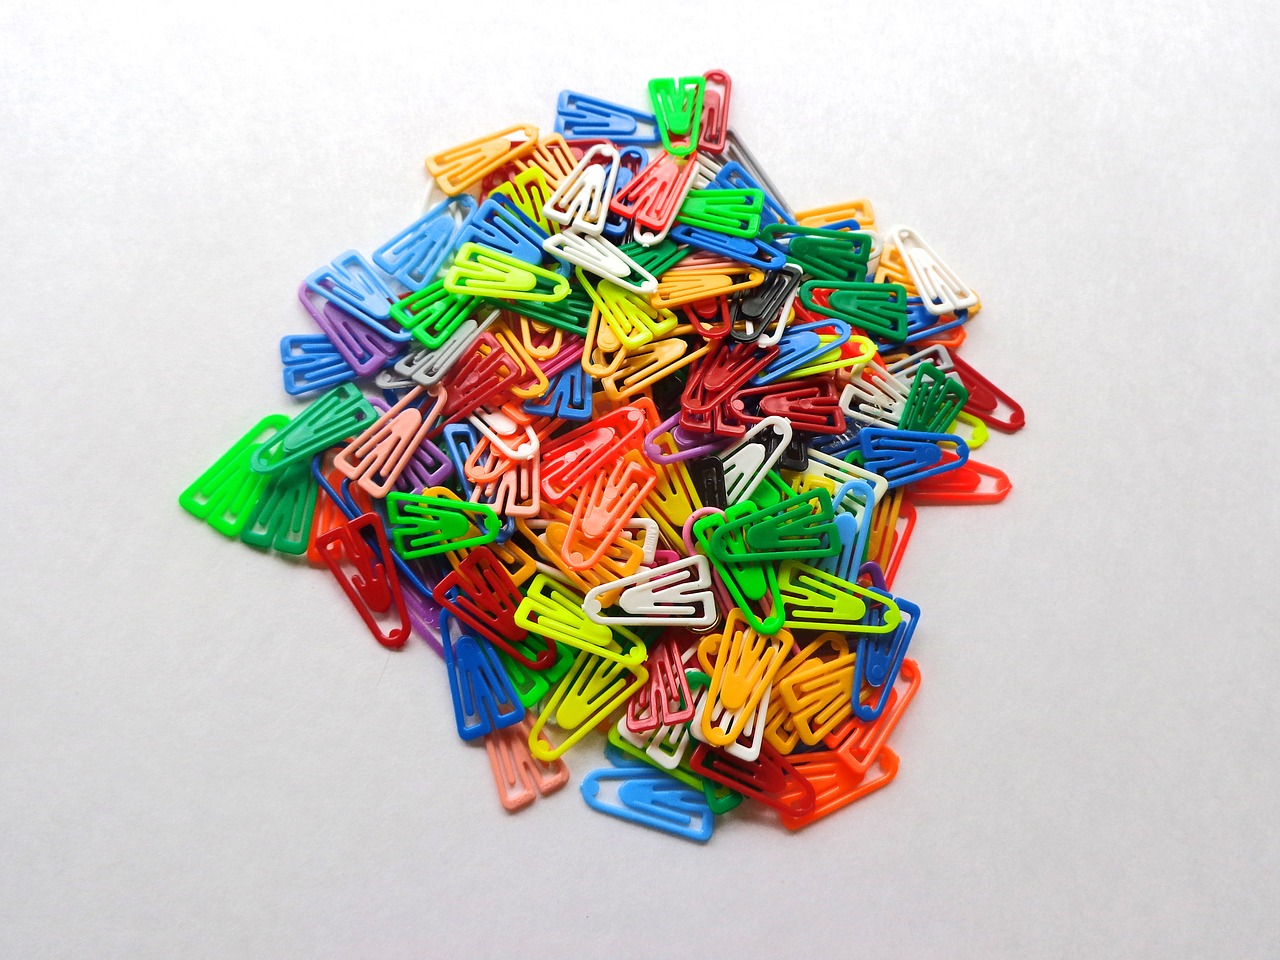 clips colorful office supplies free photo